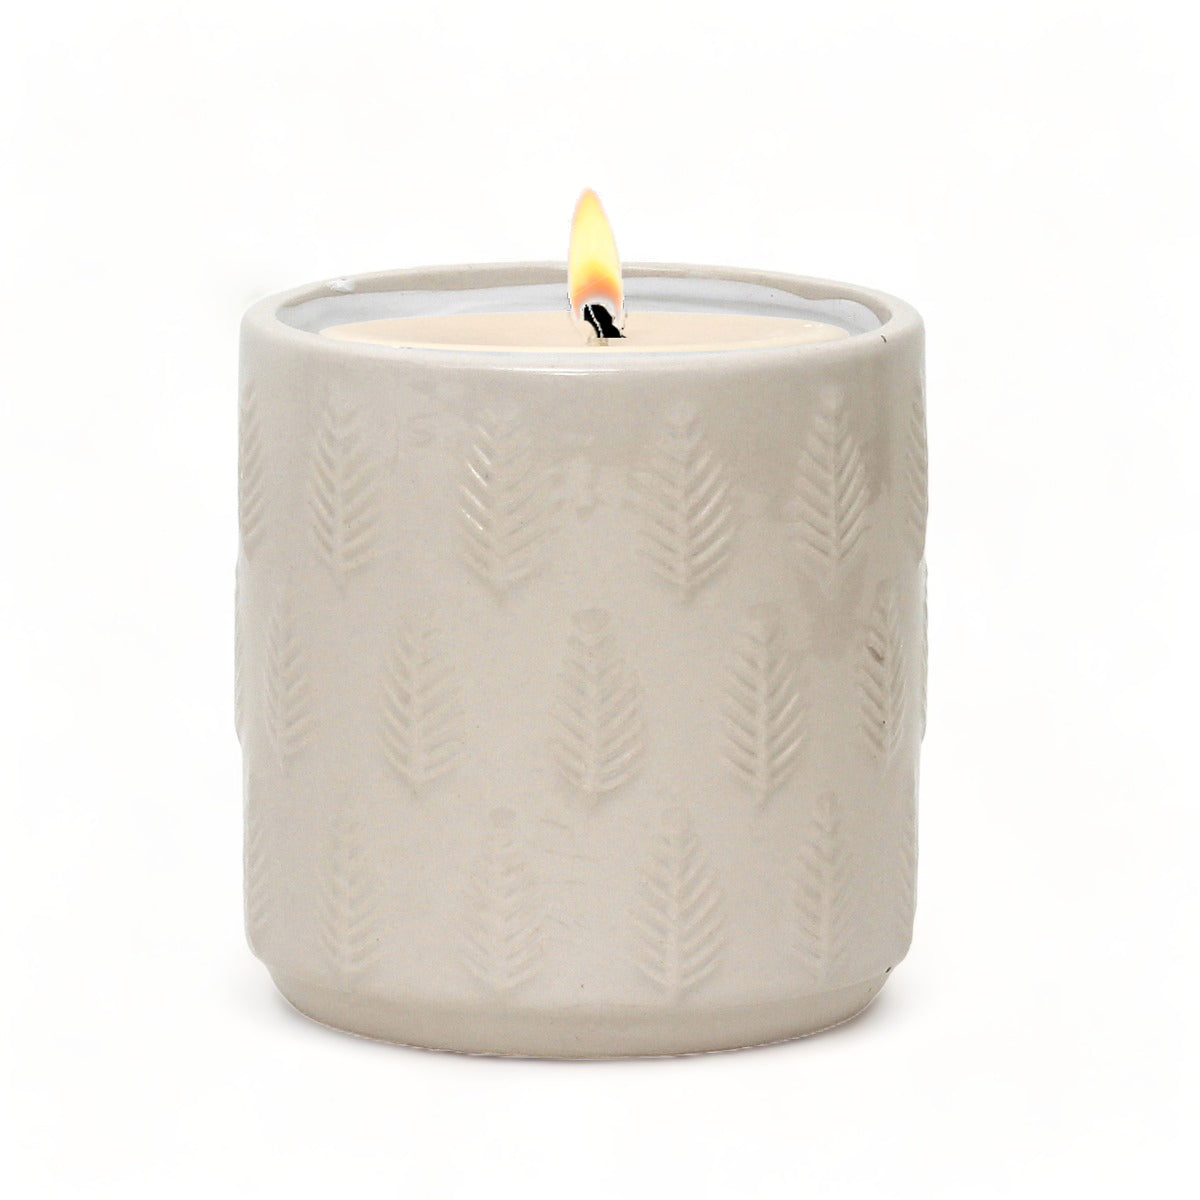 MONDIAL CANDLES: Off white Ceramic container candle